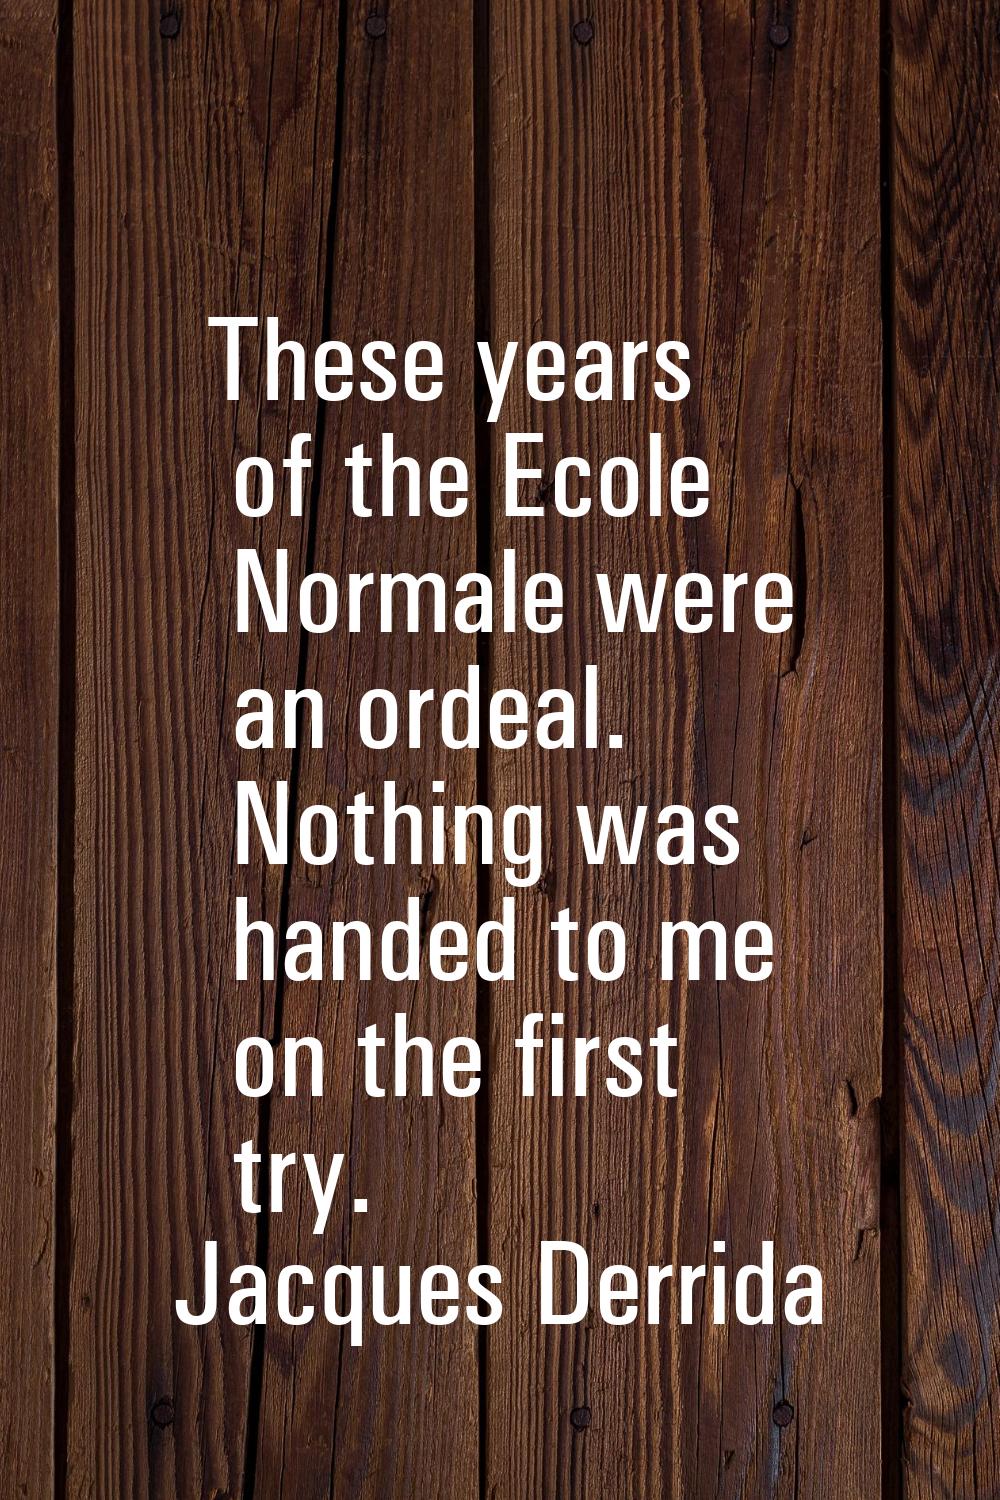 These years of the Ecole Normale were an ordeal. Nothing was handed to me on the first try.